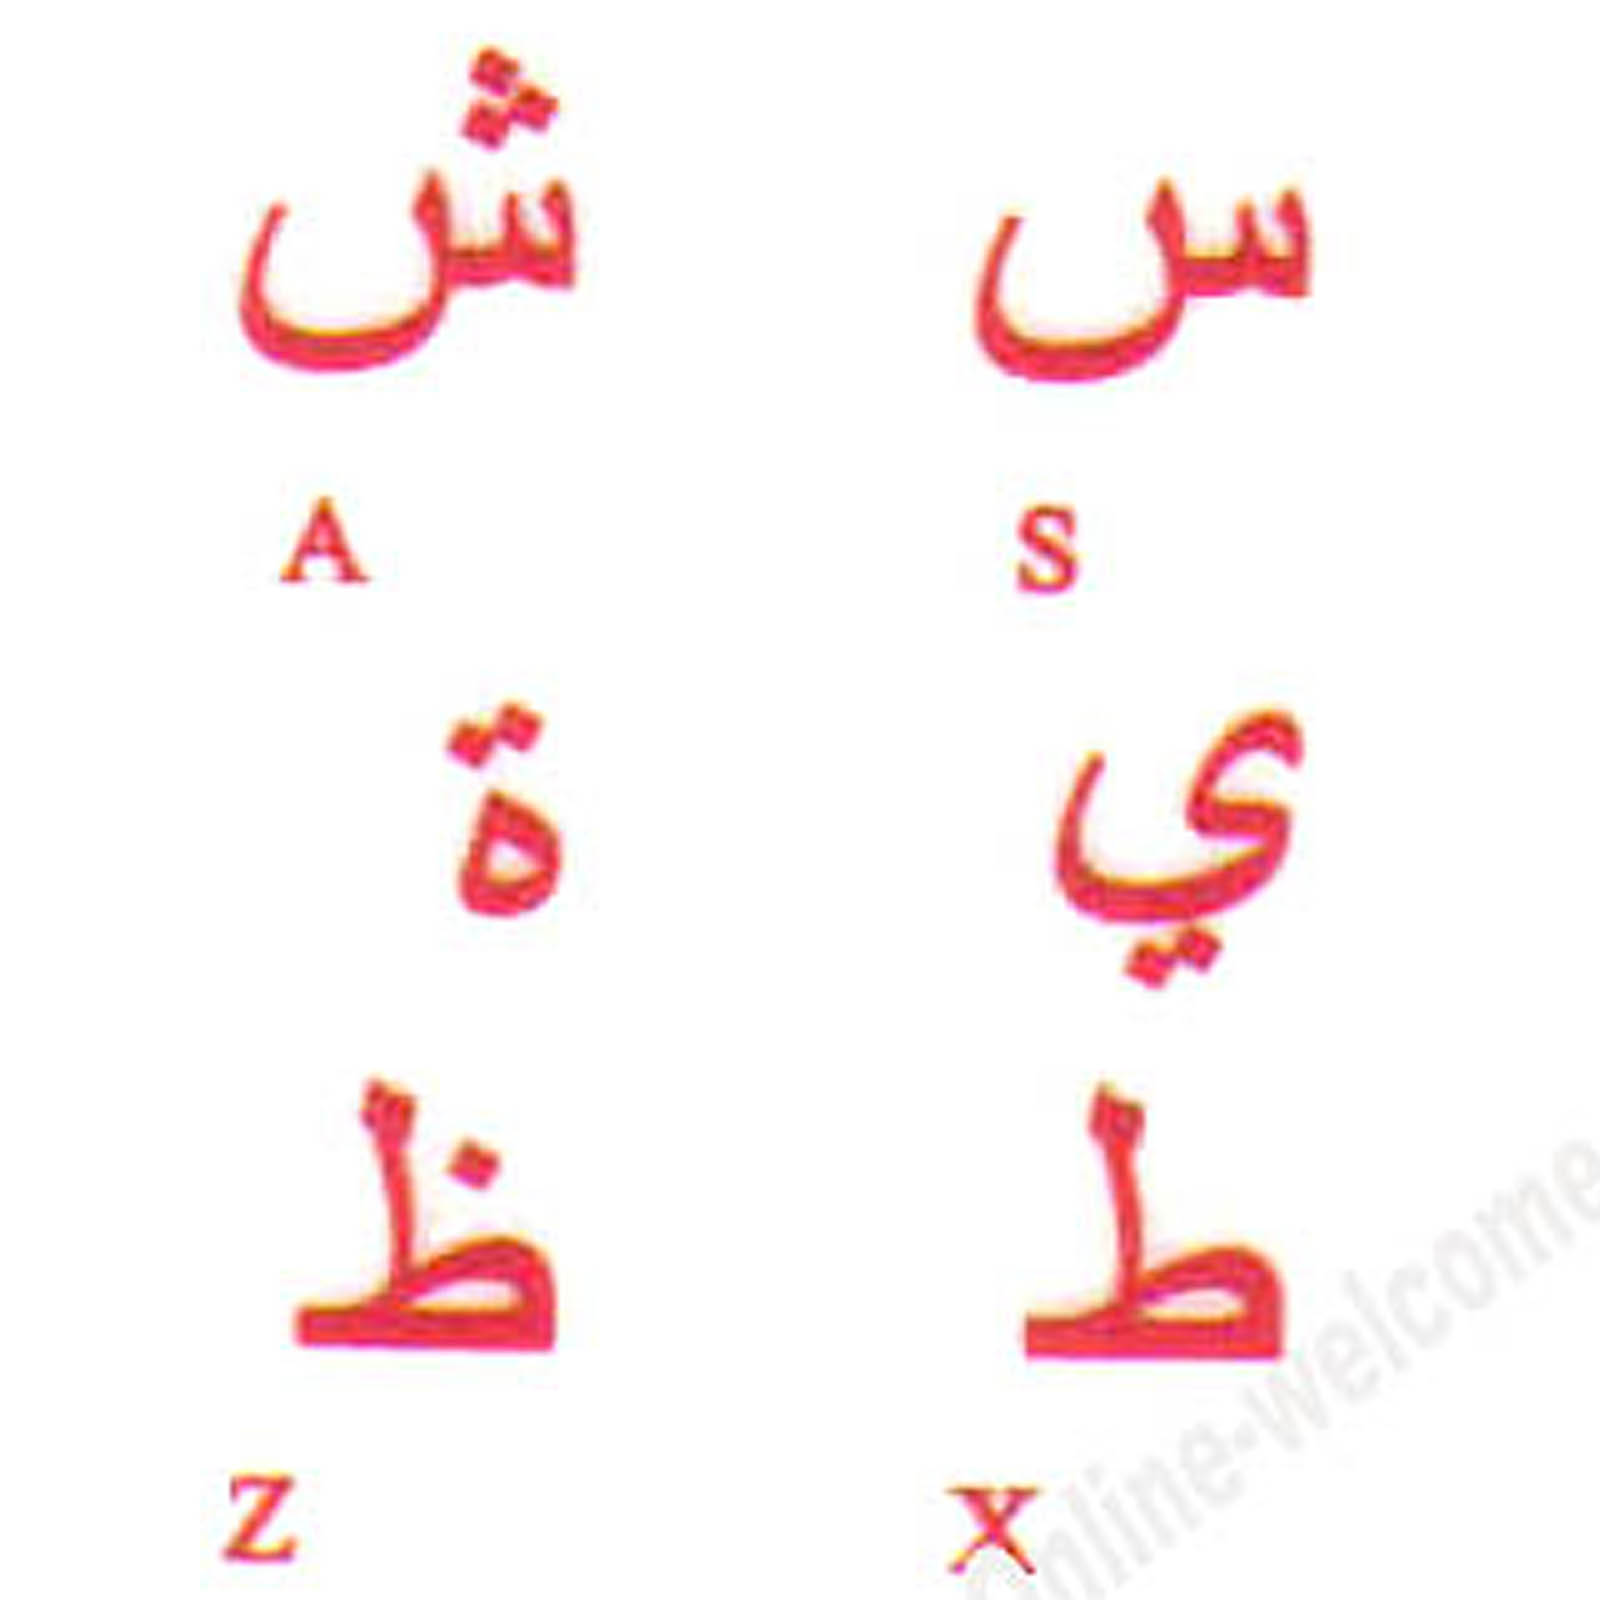 FARSI (PERSIAN) STICKERS RED LETTERS TRANSPARENT BACKGROUND